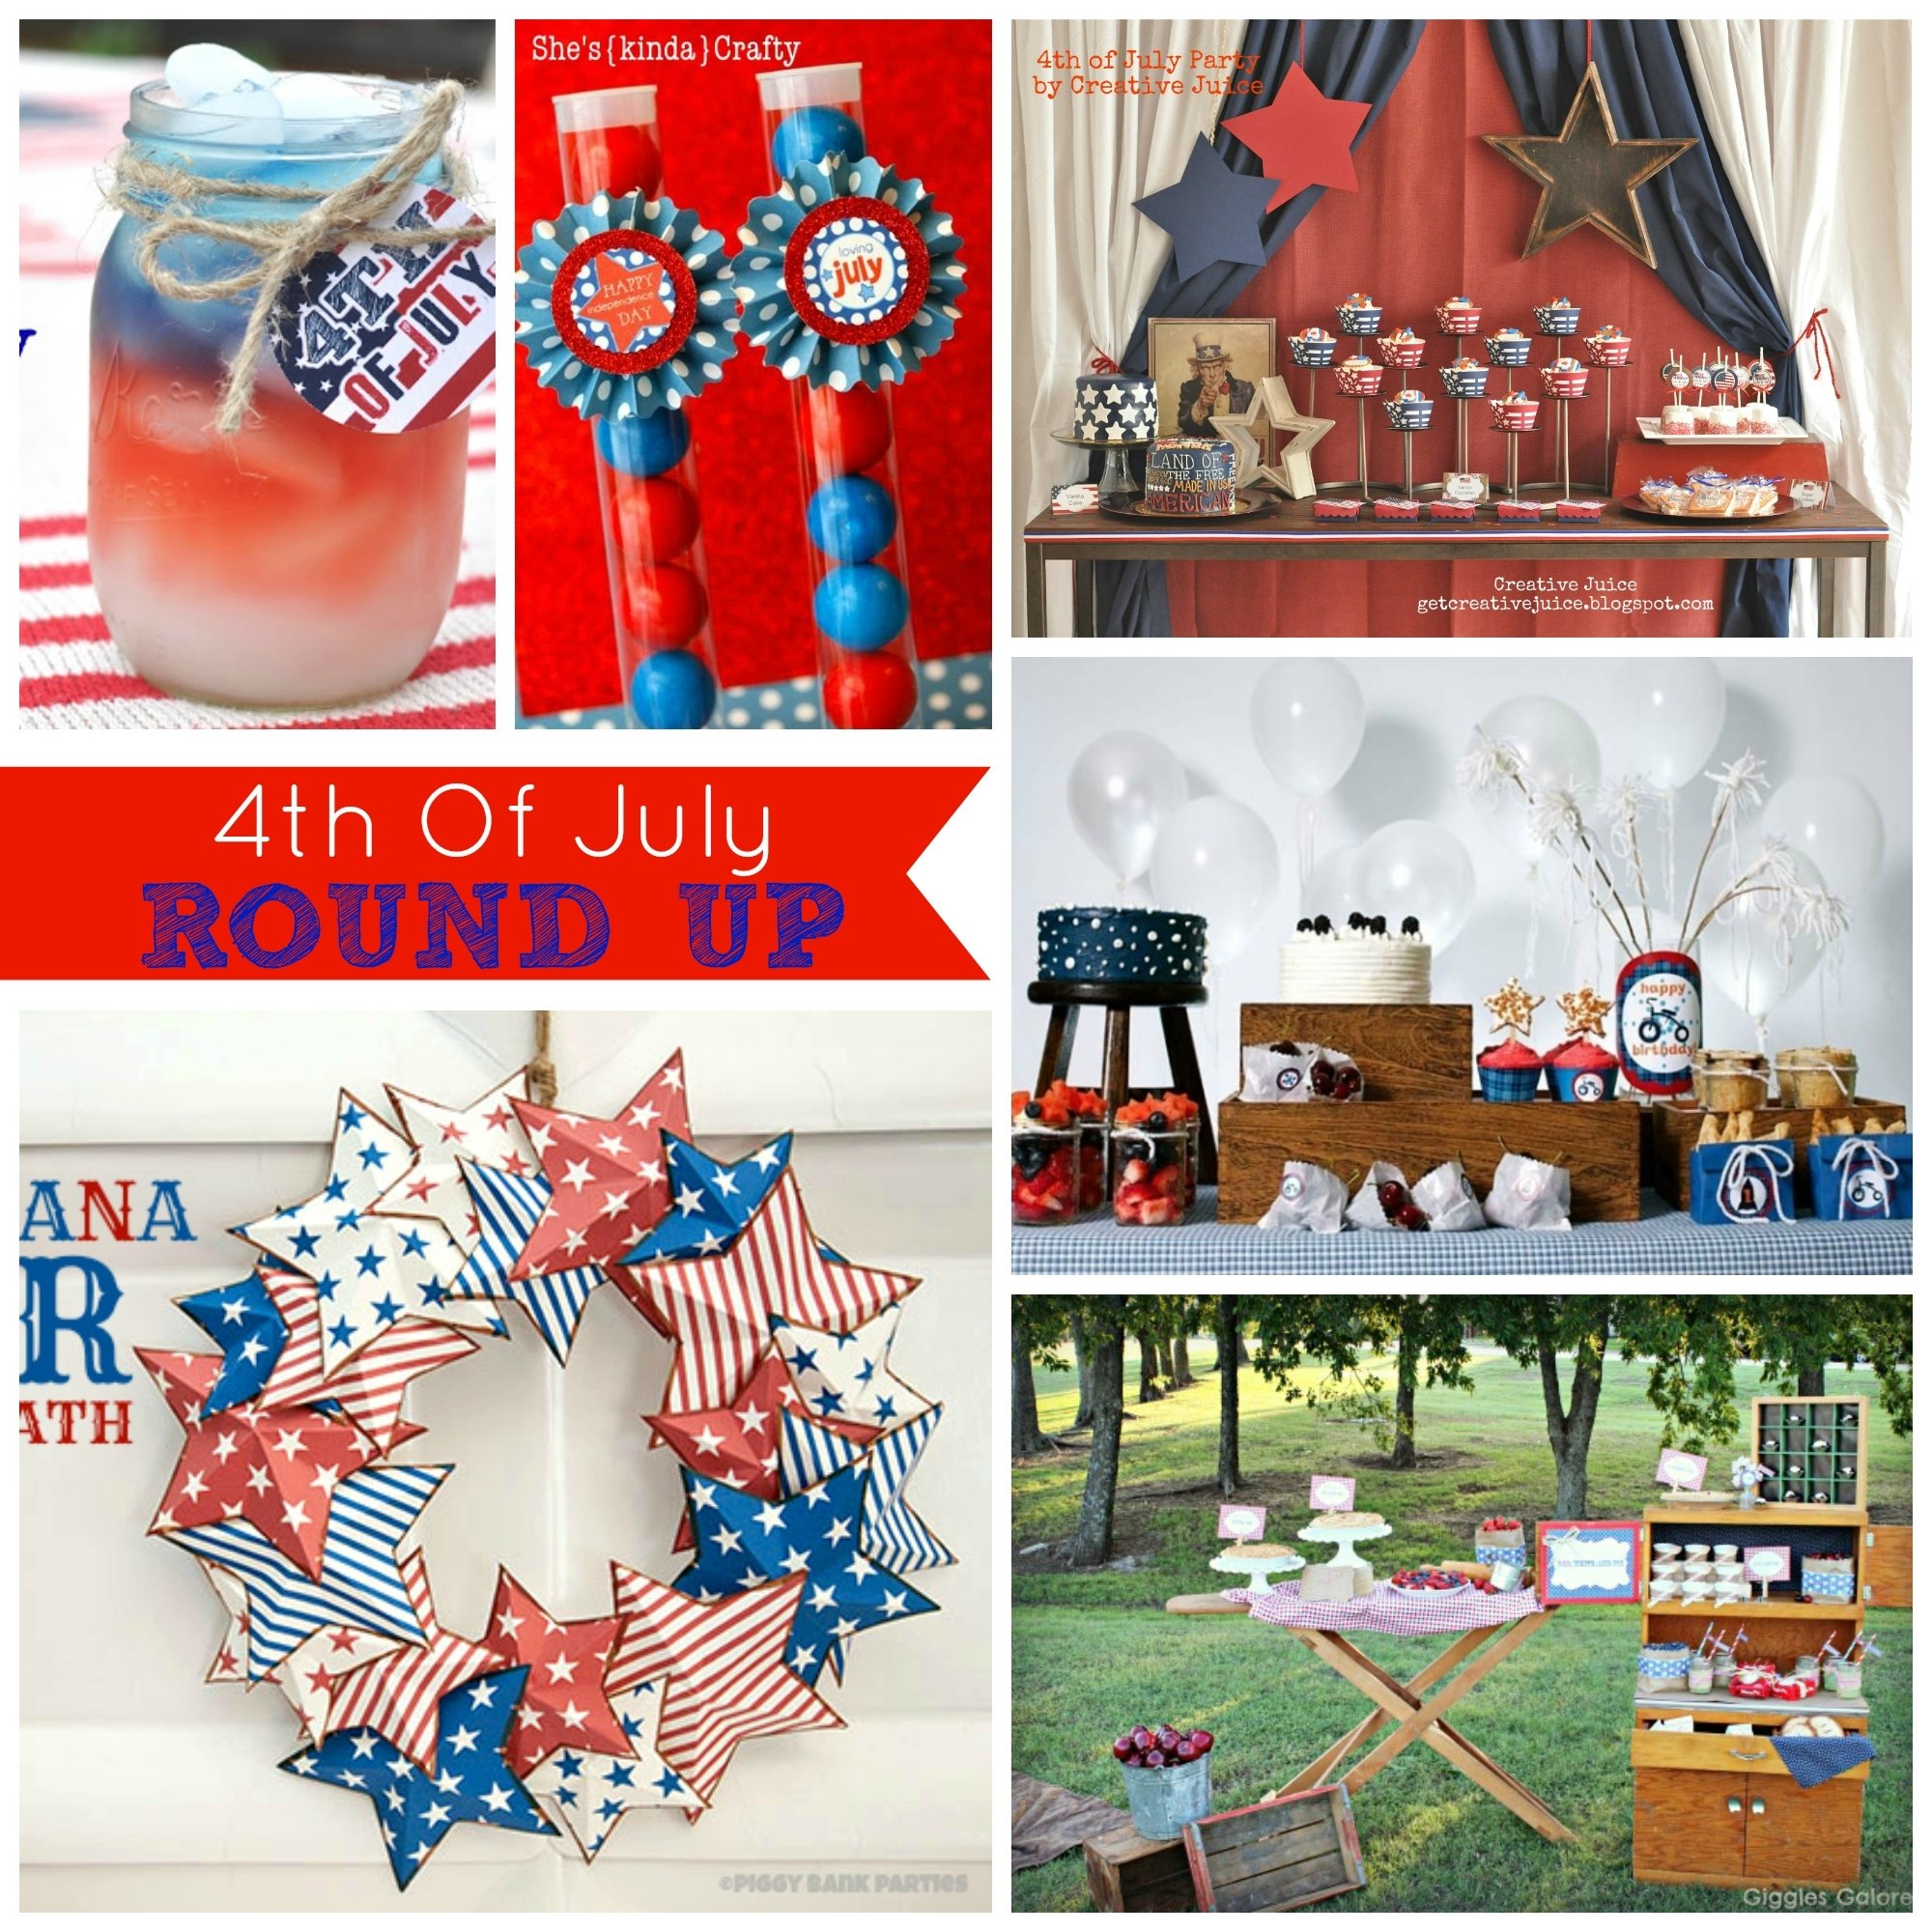 10 Beautiful 4Th Of July Party Ideas For Adults round up 4th of july party ideas creative juice 2 2023